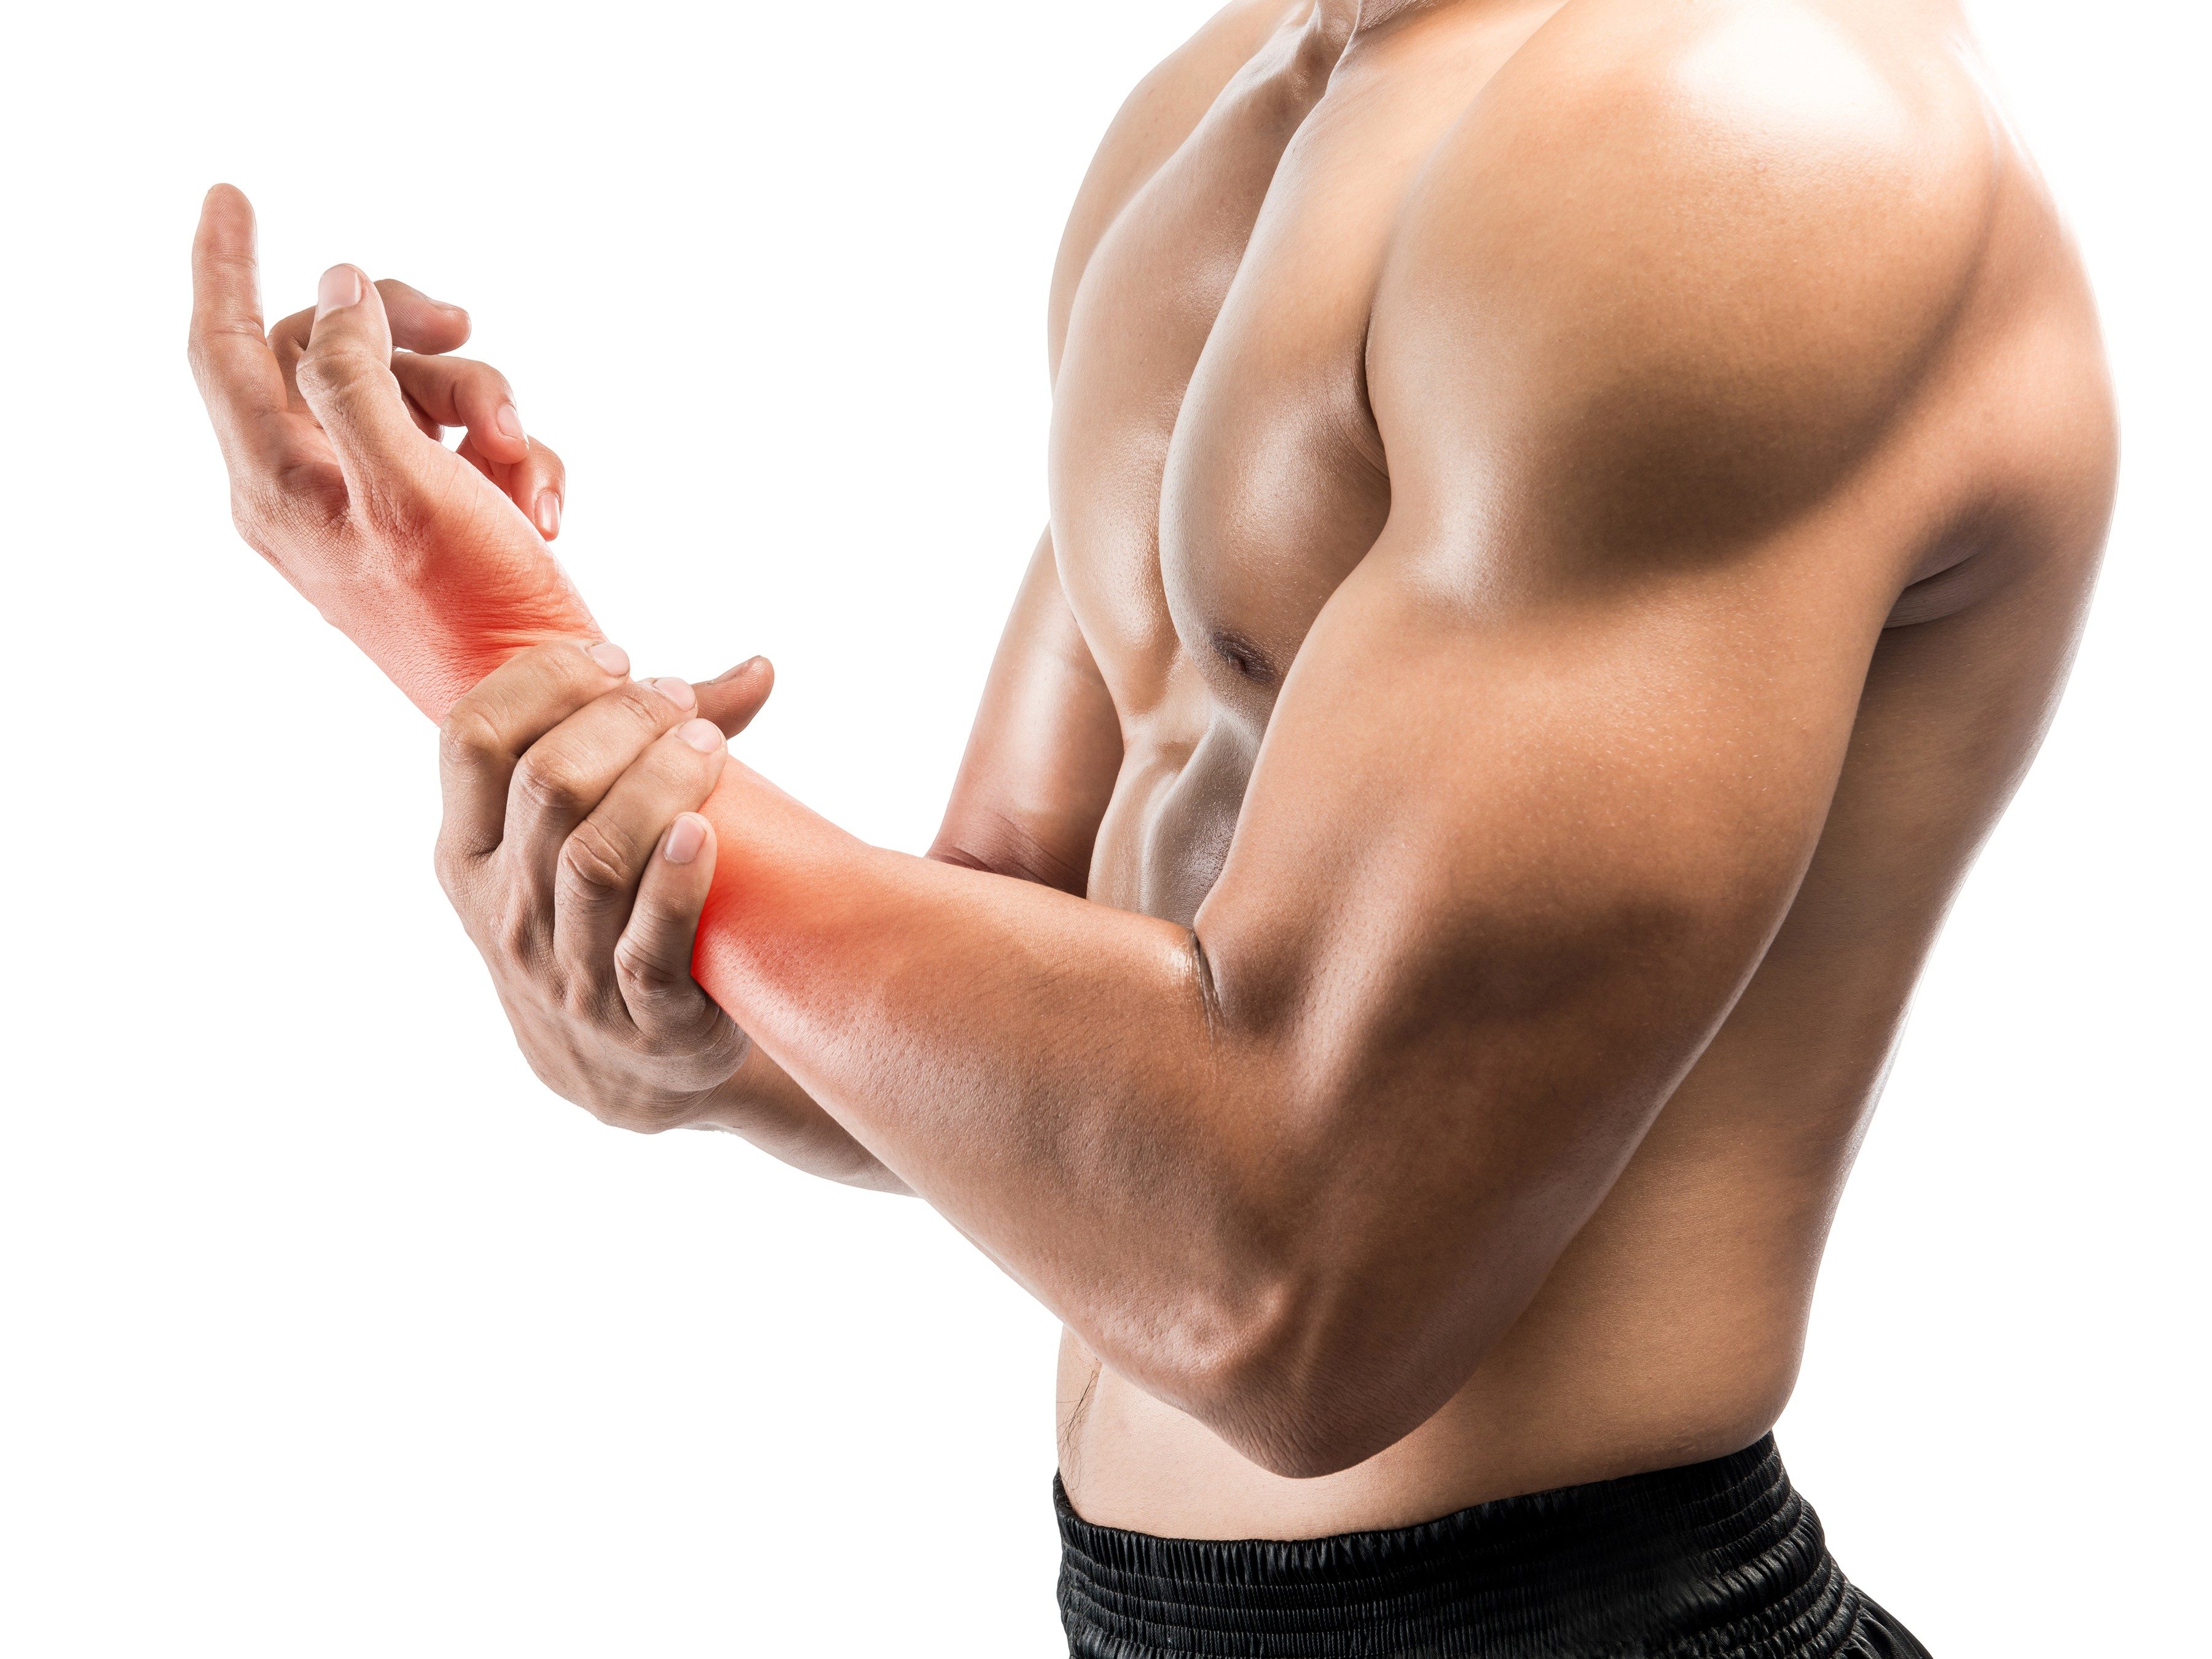 10 things you can do to heal sore muscles